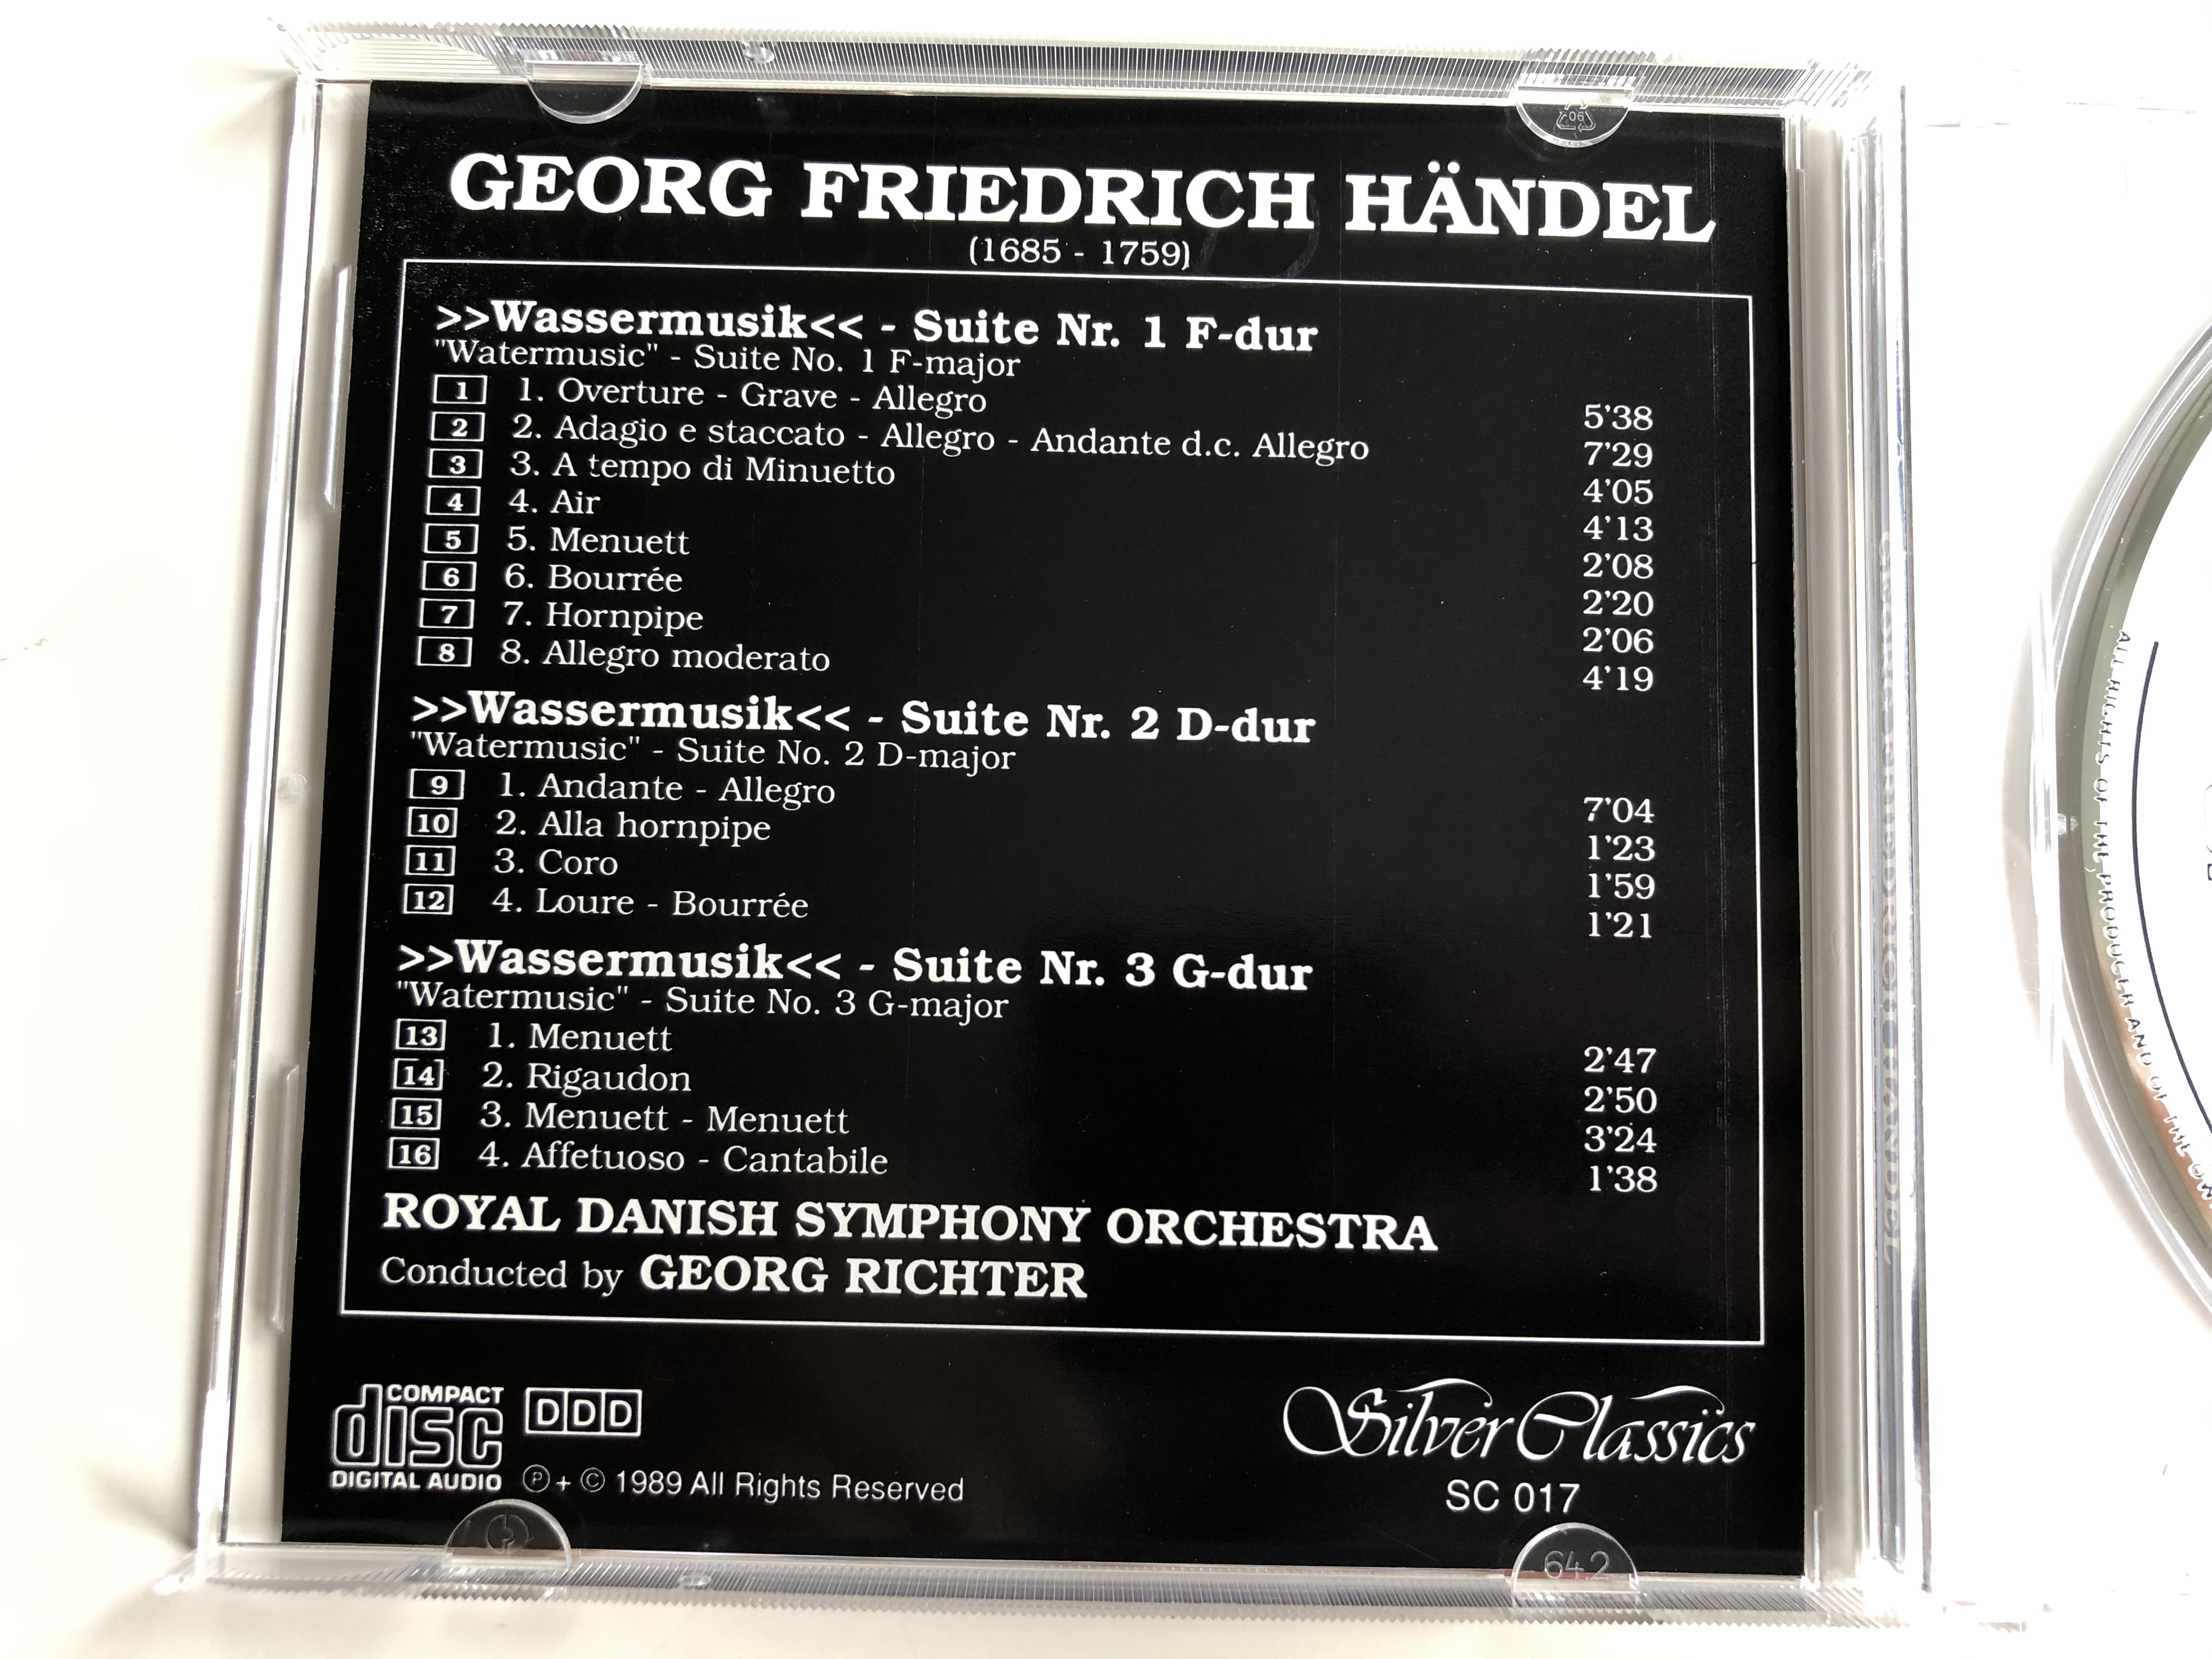 georg-friedrich-handel-wassermusik-suite-nr.-1-3-royal-danish-symphony-orchestra-conducted-by-georg-richter-silver-classics-audio-cd-1989-sc-017-2-.jpg